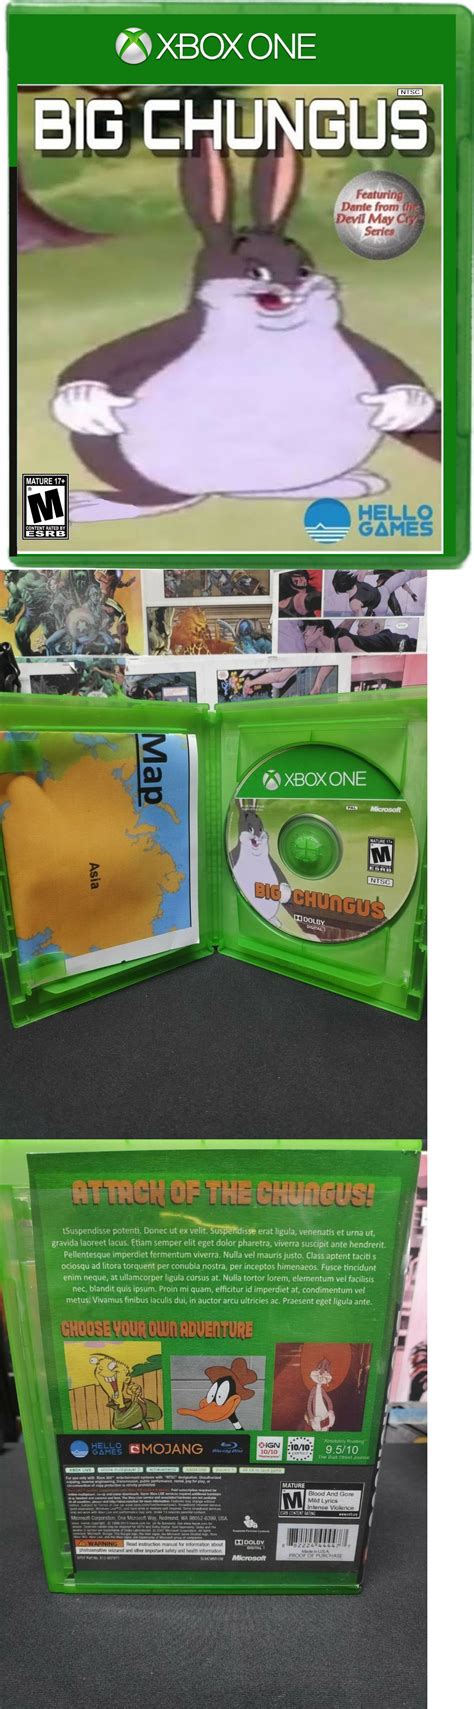 manuals inserts and box art 182174 big chungus xbox one case with disk prop meme original